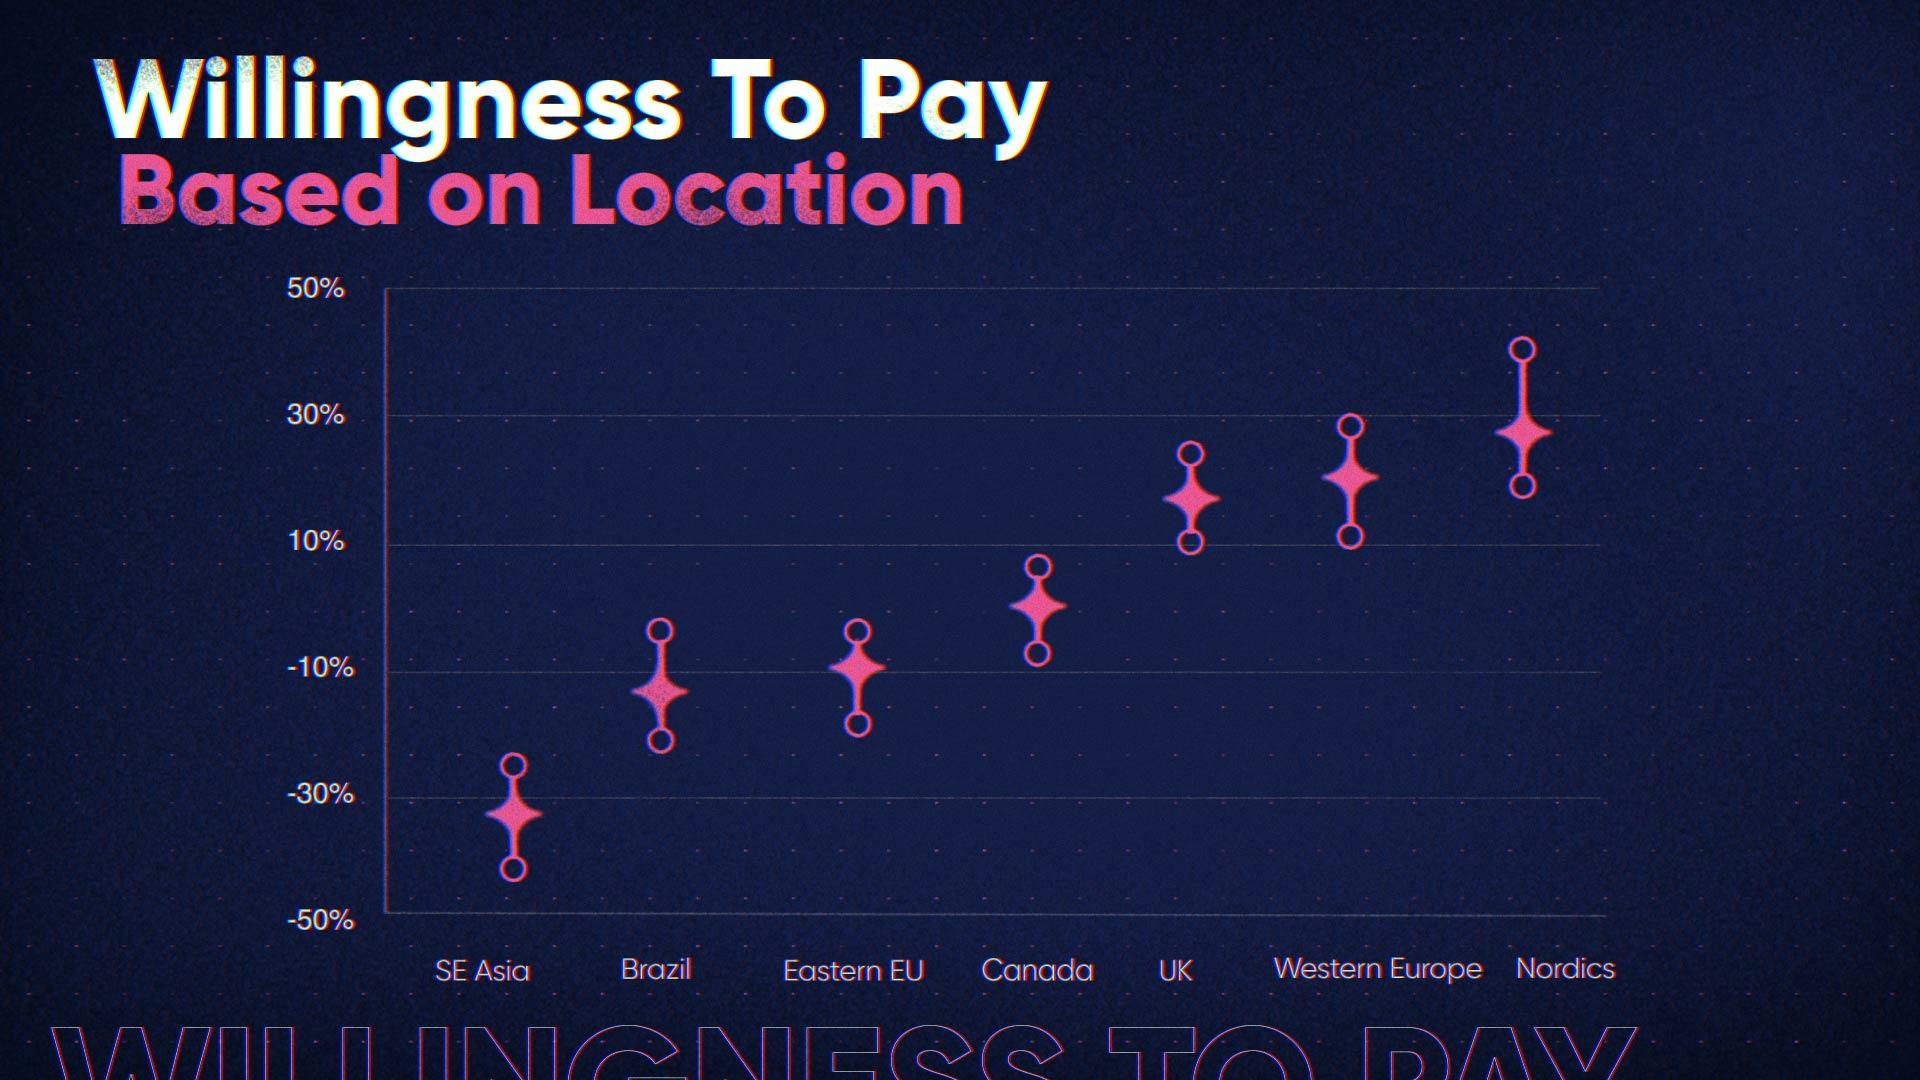 Willingness to Pay Based on Location can vary